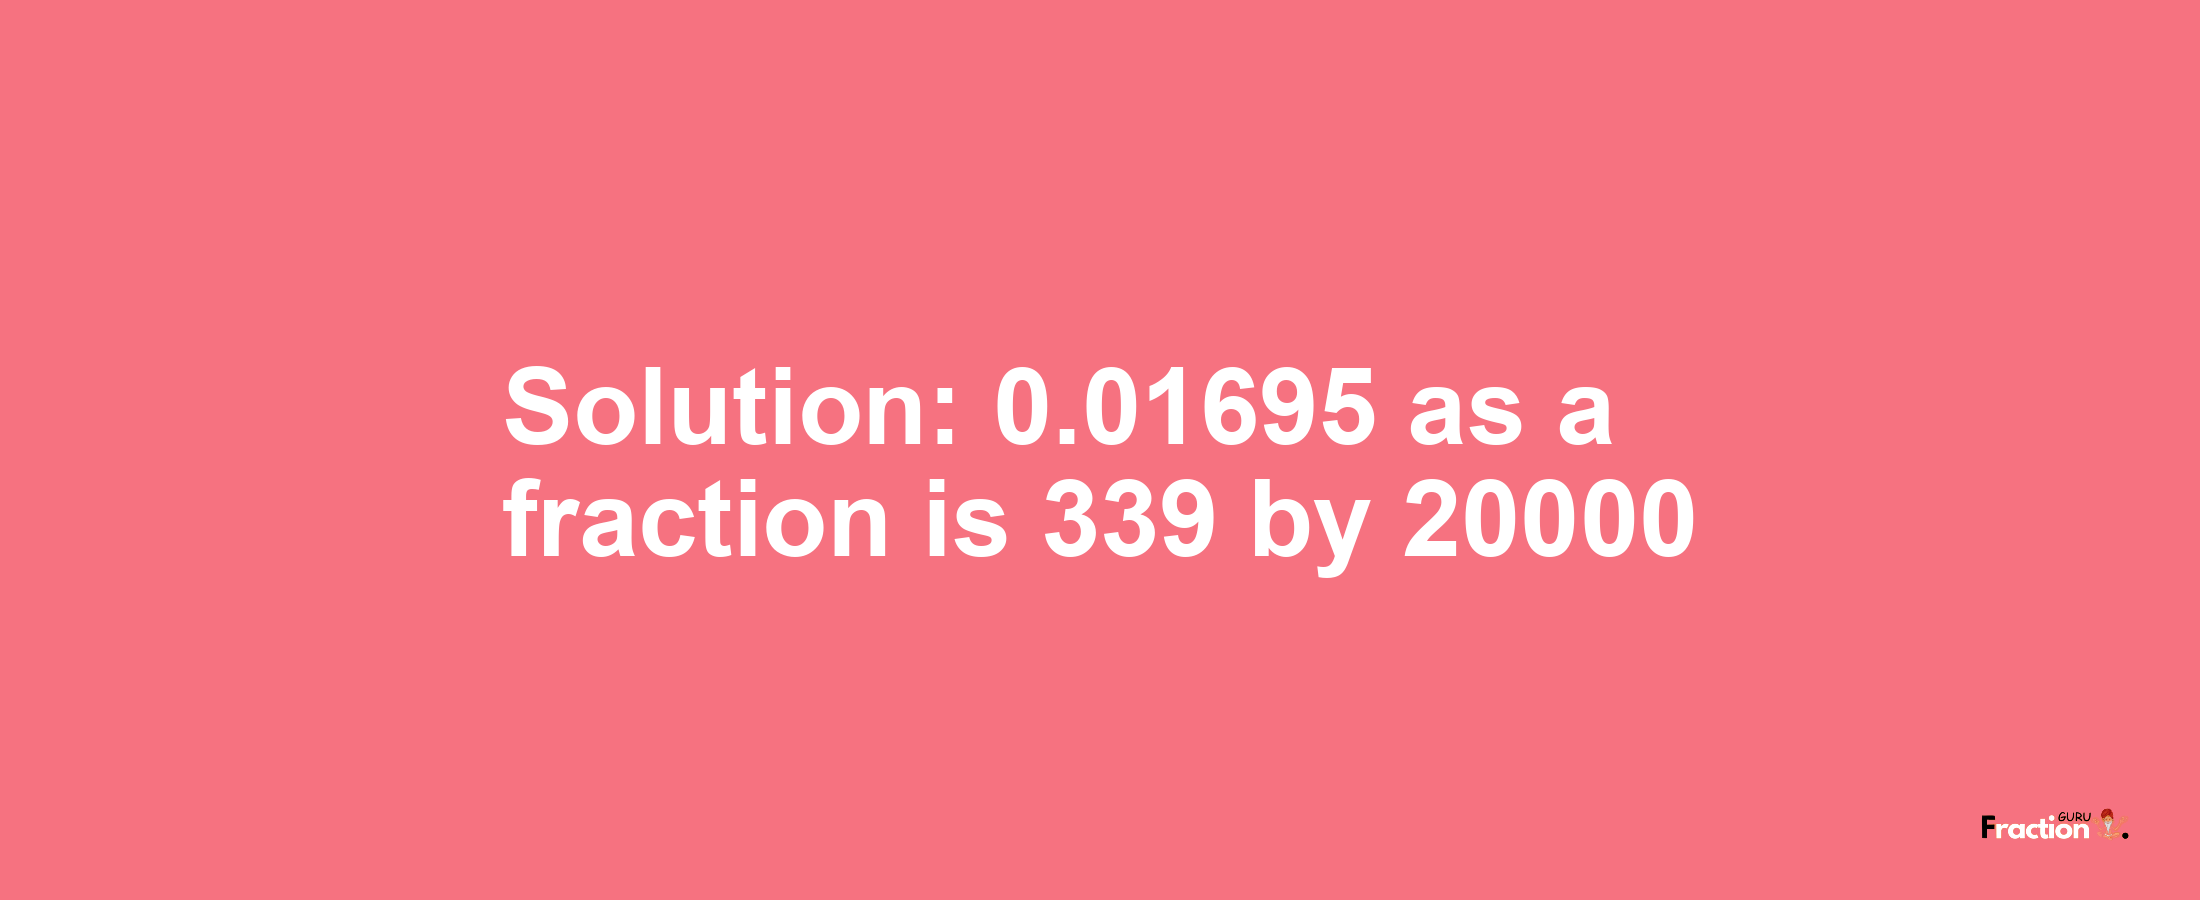 Solution:0.01695 as a fraction is 339/20000